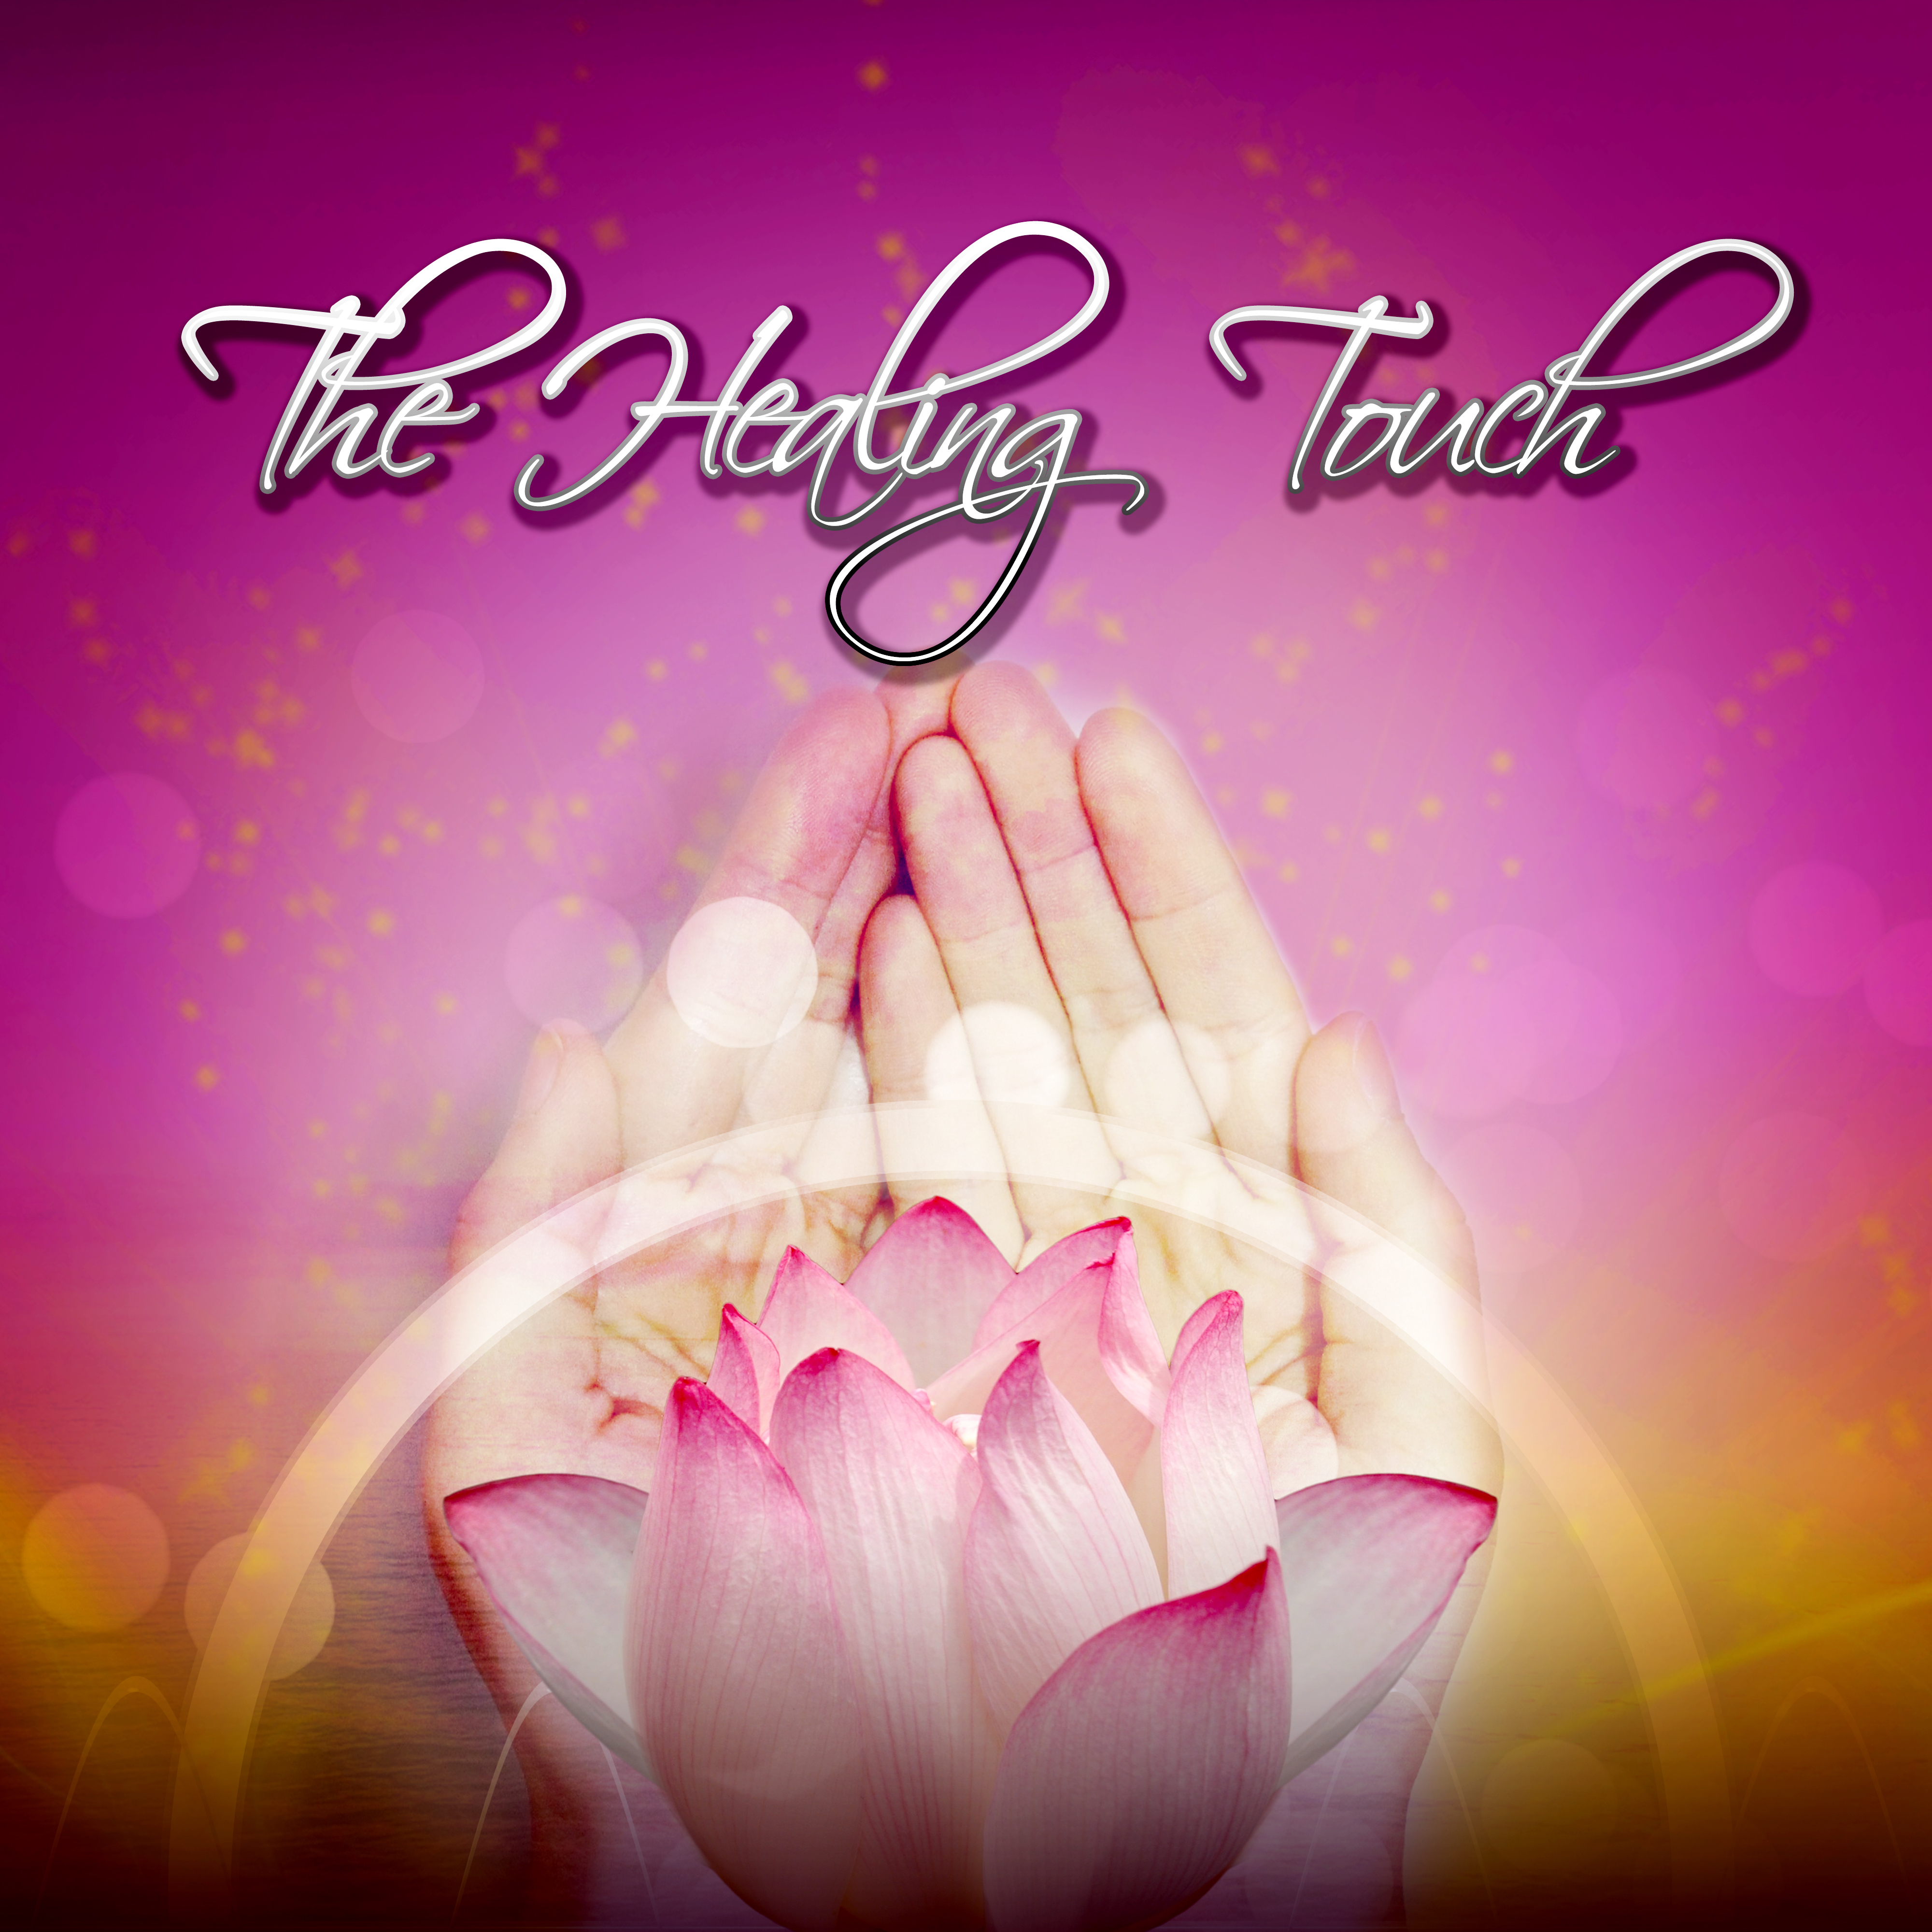 The Healing Touch - Music for Reiki & Meditation, Therapeutic Music, Relaxing Instrumental Music, Soothing Sounds for Massage, Gentle Touch, Calming Music